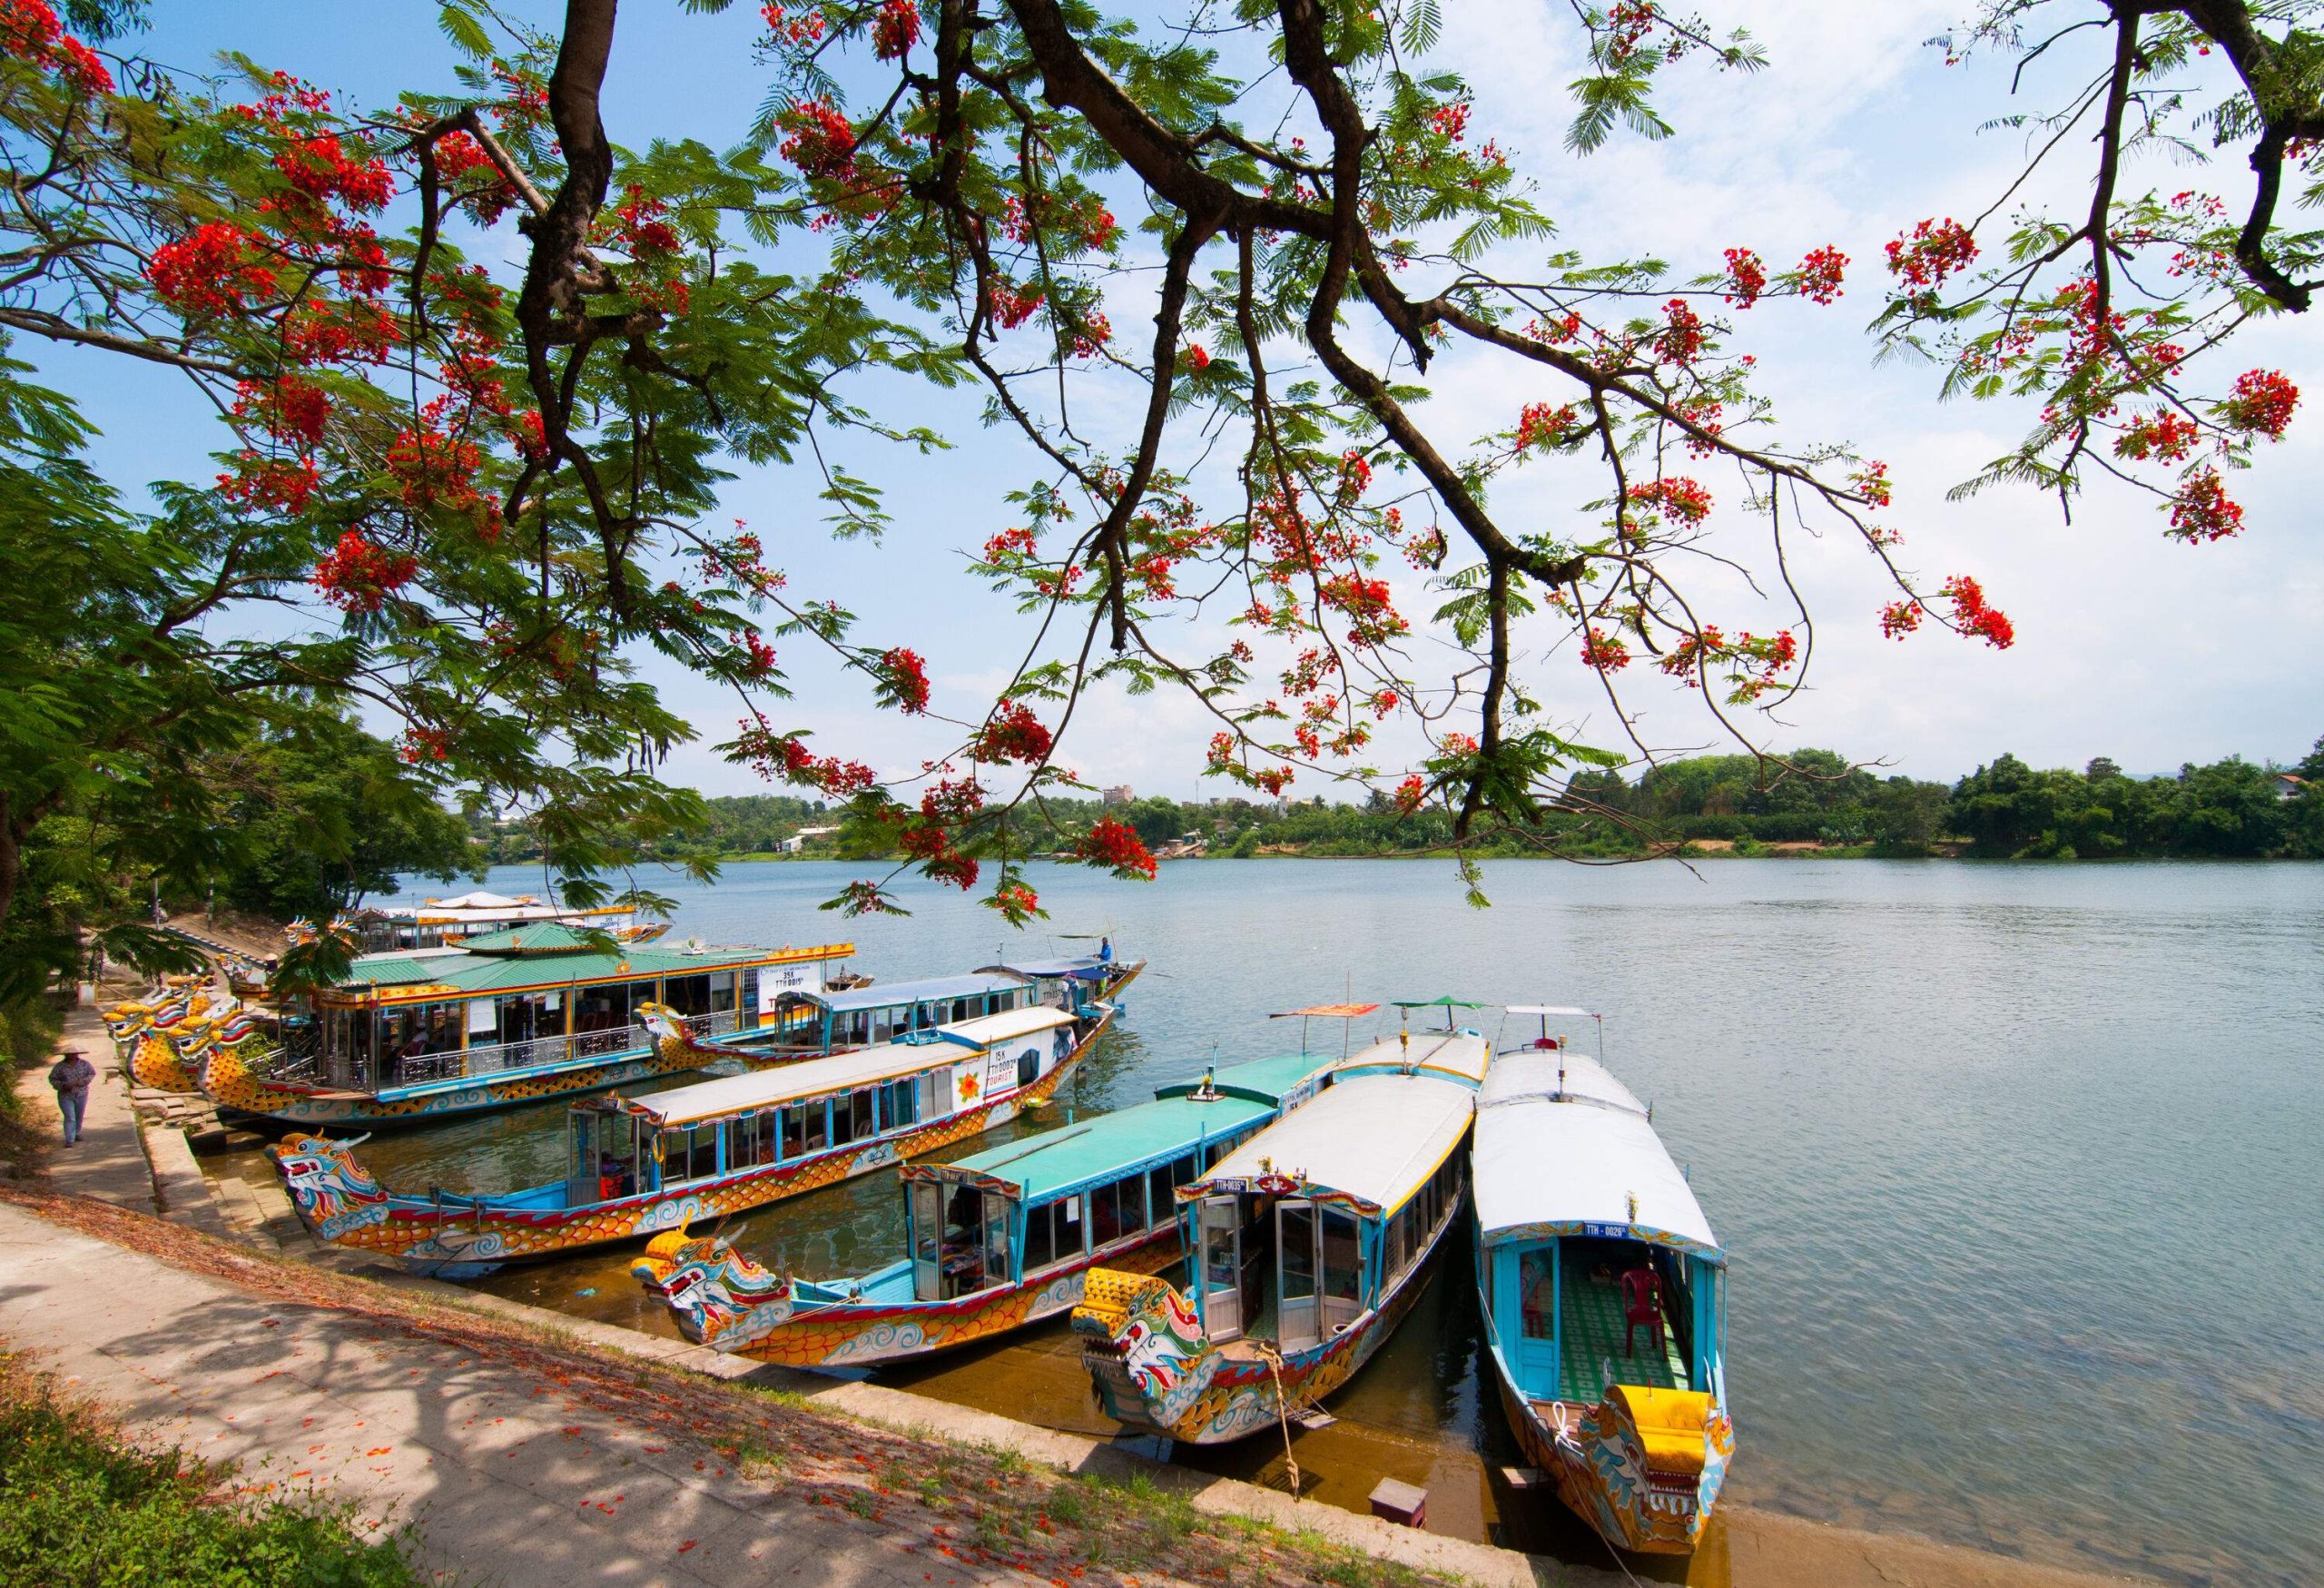 The tranquil bank of a serene waterway is lined with colourful traditional passenger boats, with a lush canopy of tree branches in the foreground.